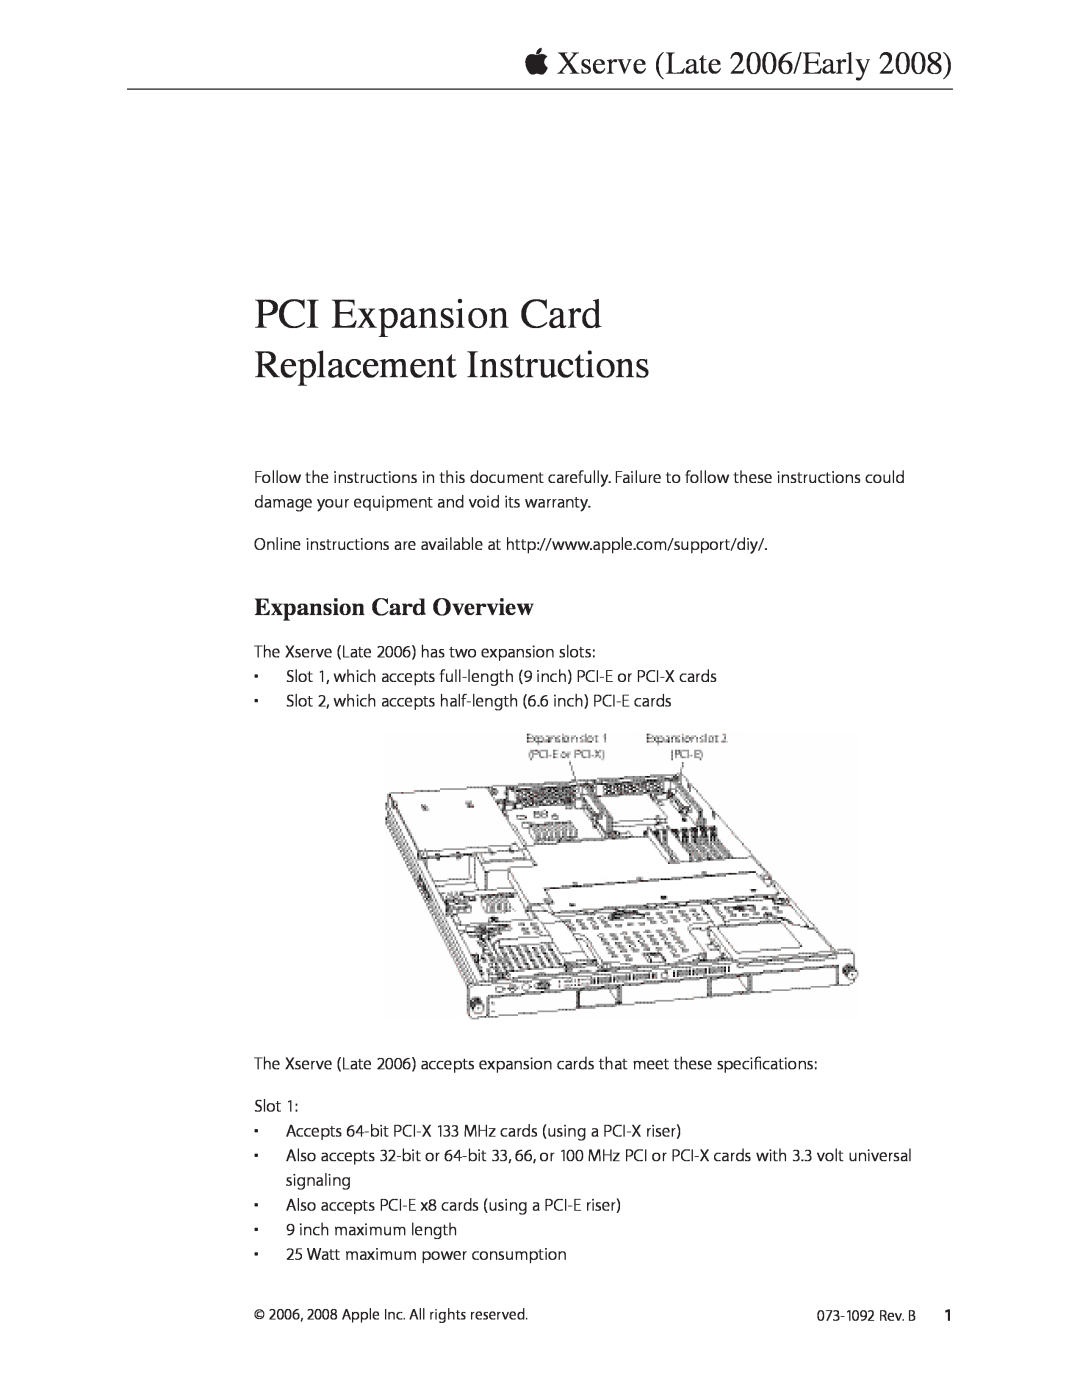 Apple PCI-X 133 warranty Expansion Card Overview, PCI Expansion Card, Replacement Instructions,  Xserve Late 2006/Early 